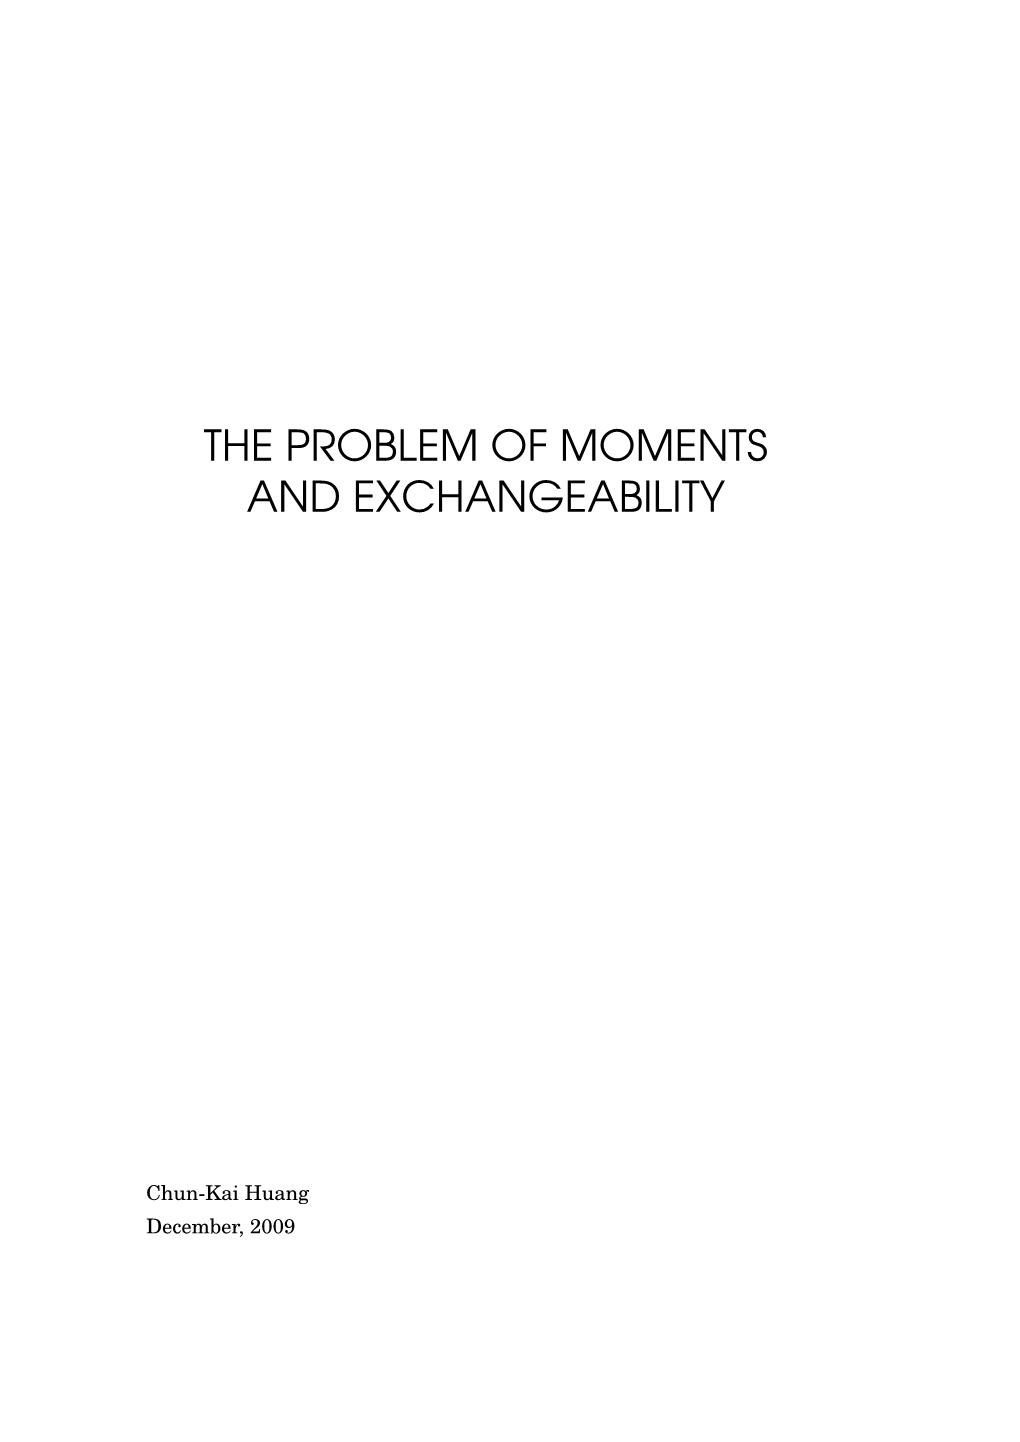 The Problem of Moments and Exchangeability